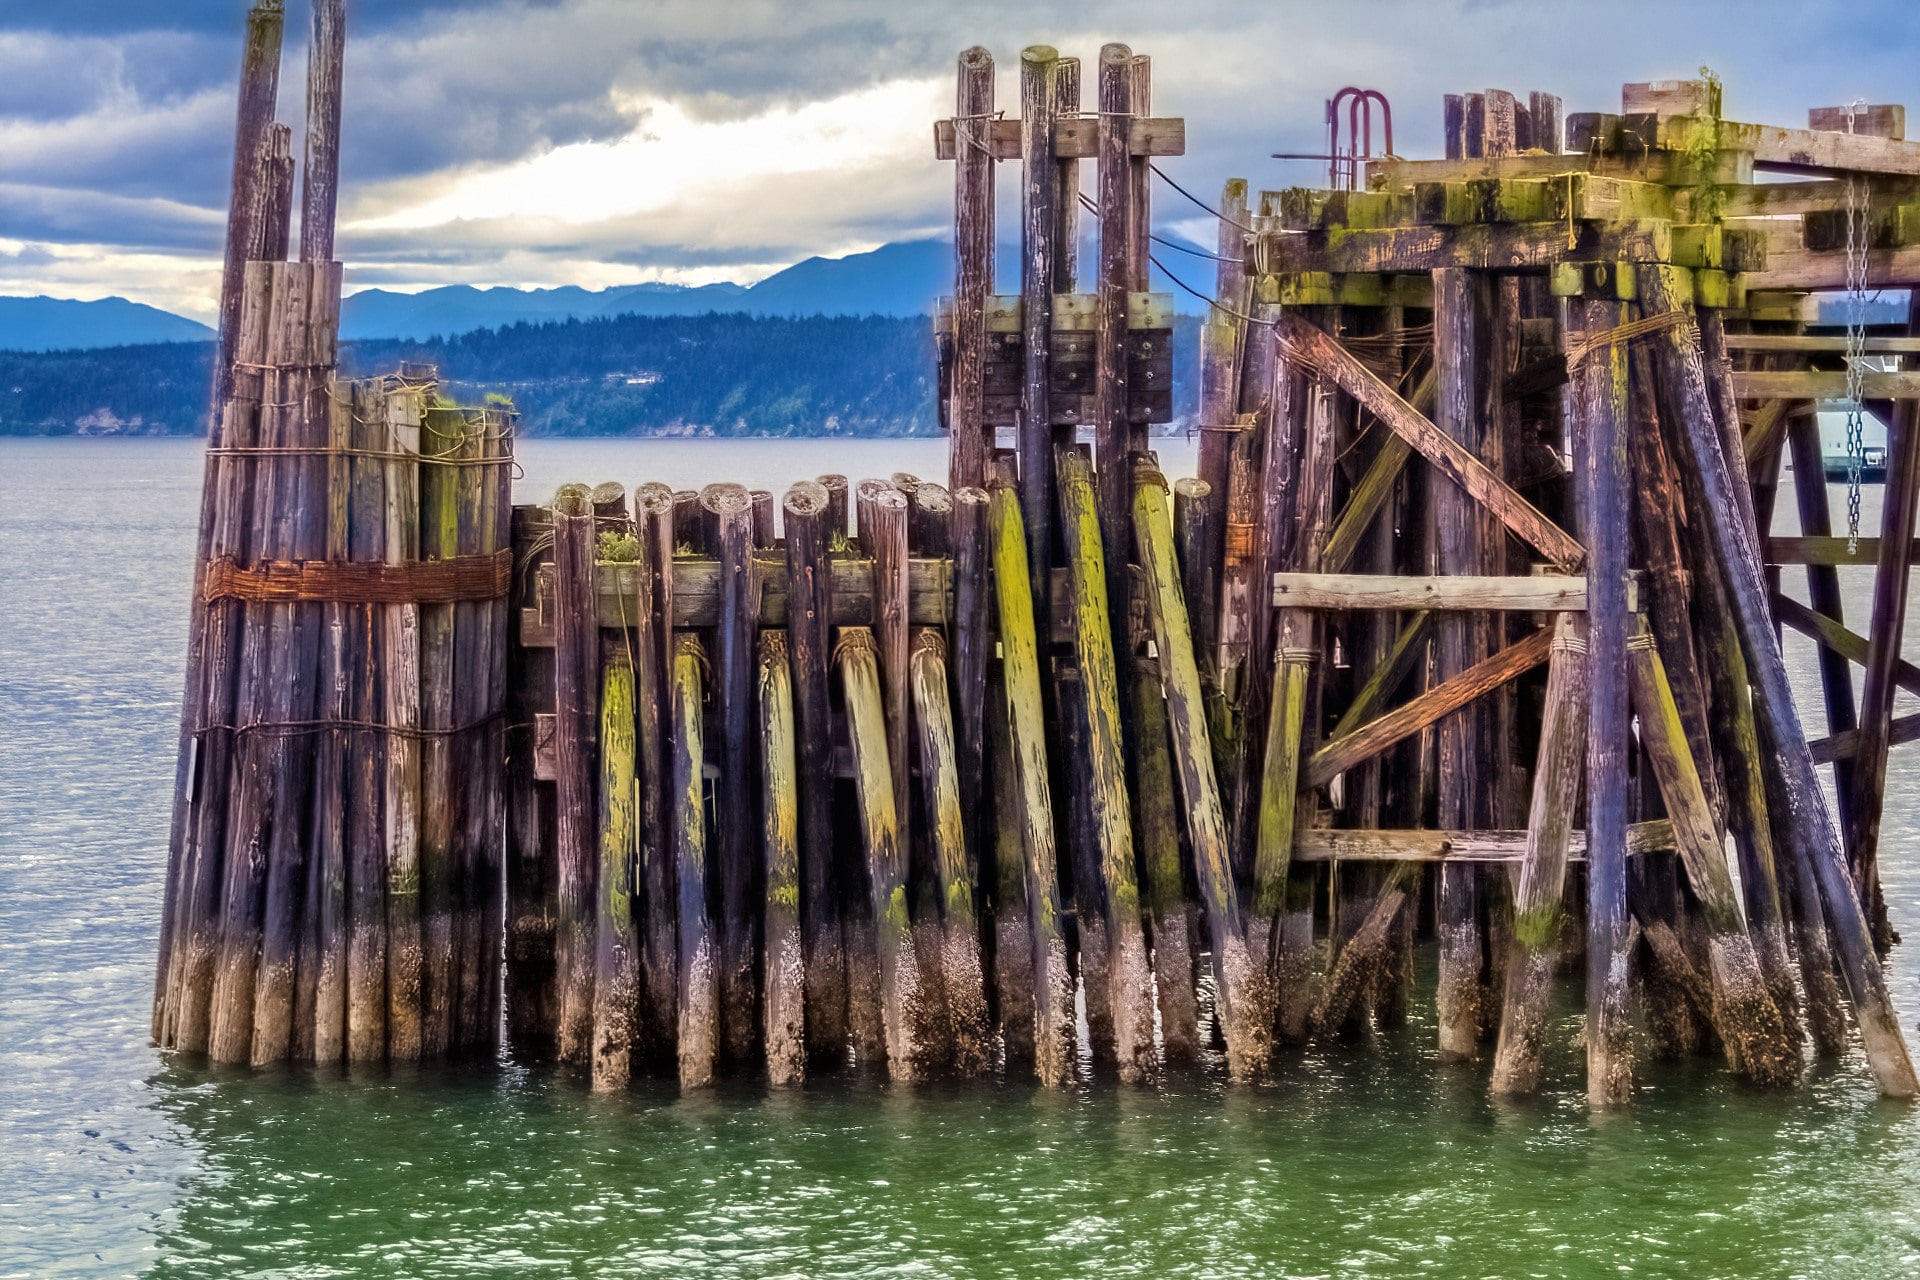 Colors of Wood - Port Townsend, WA.